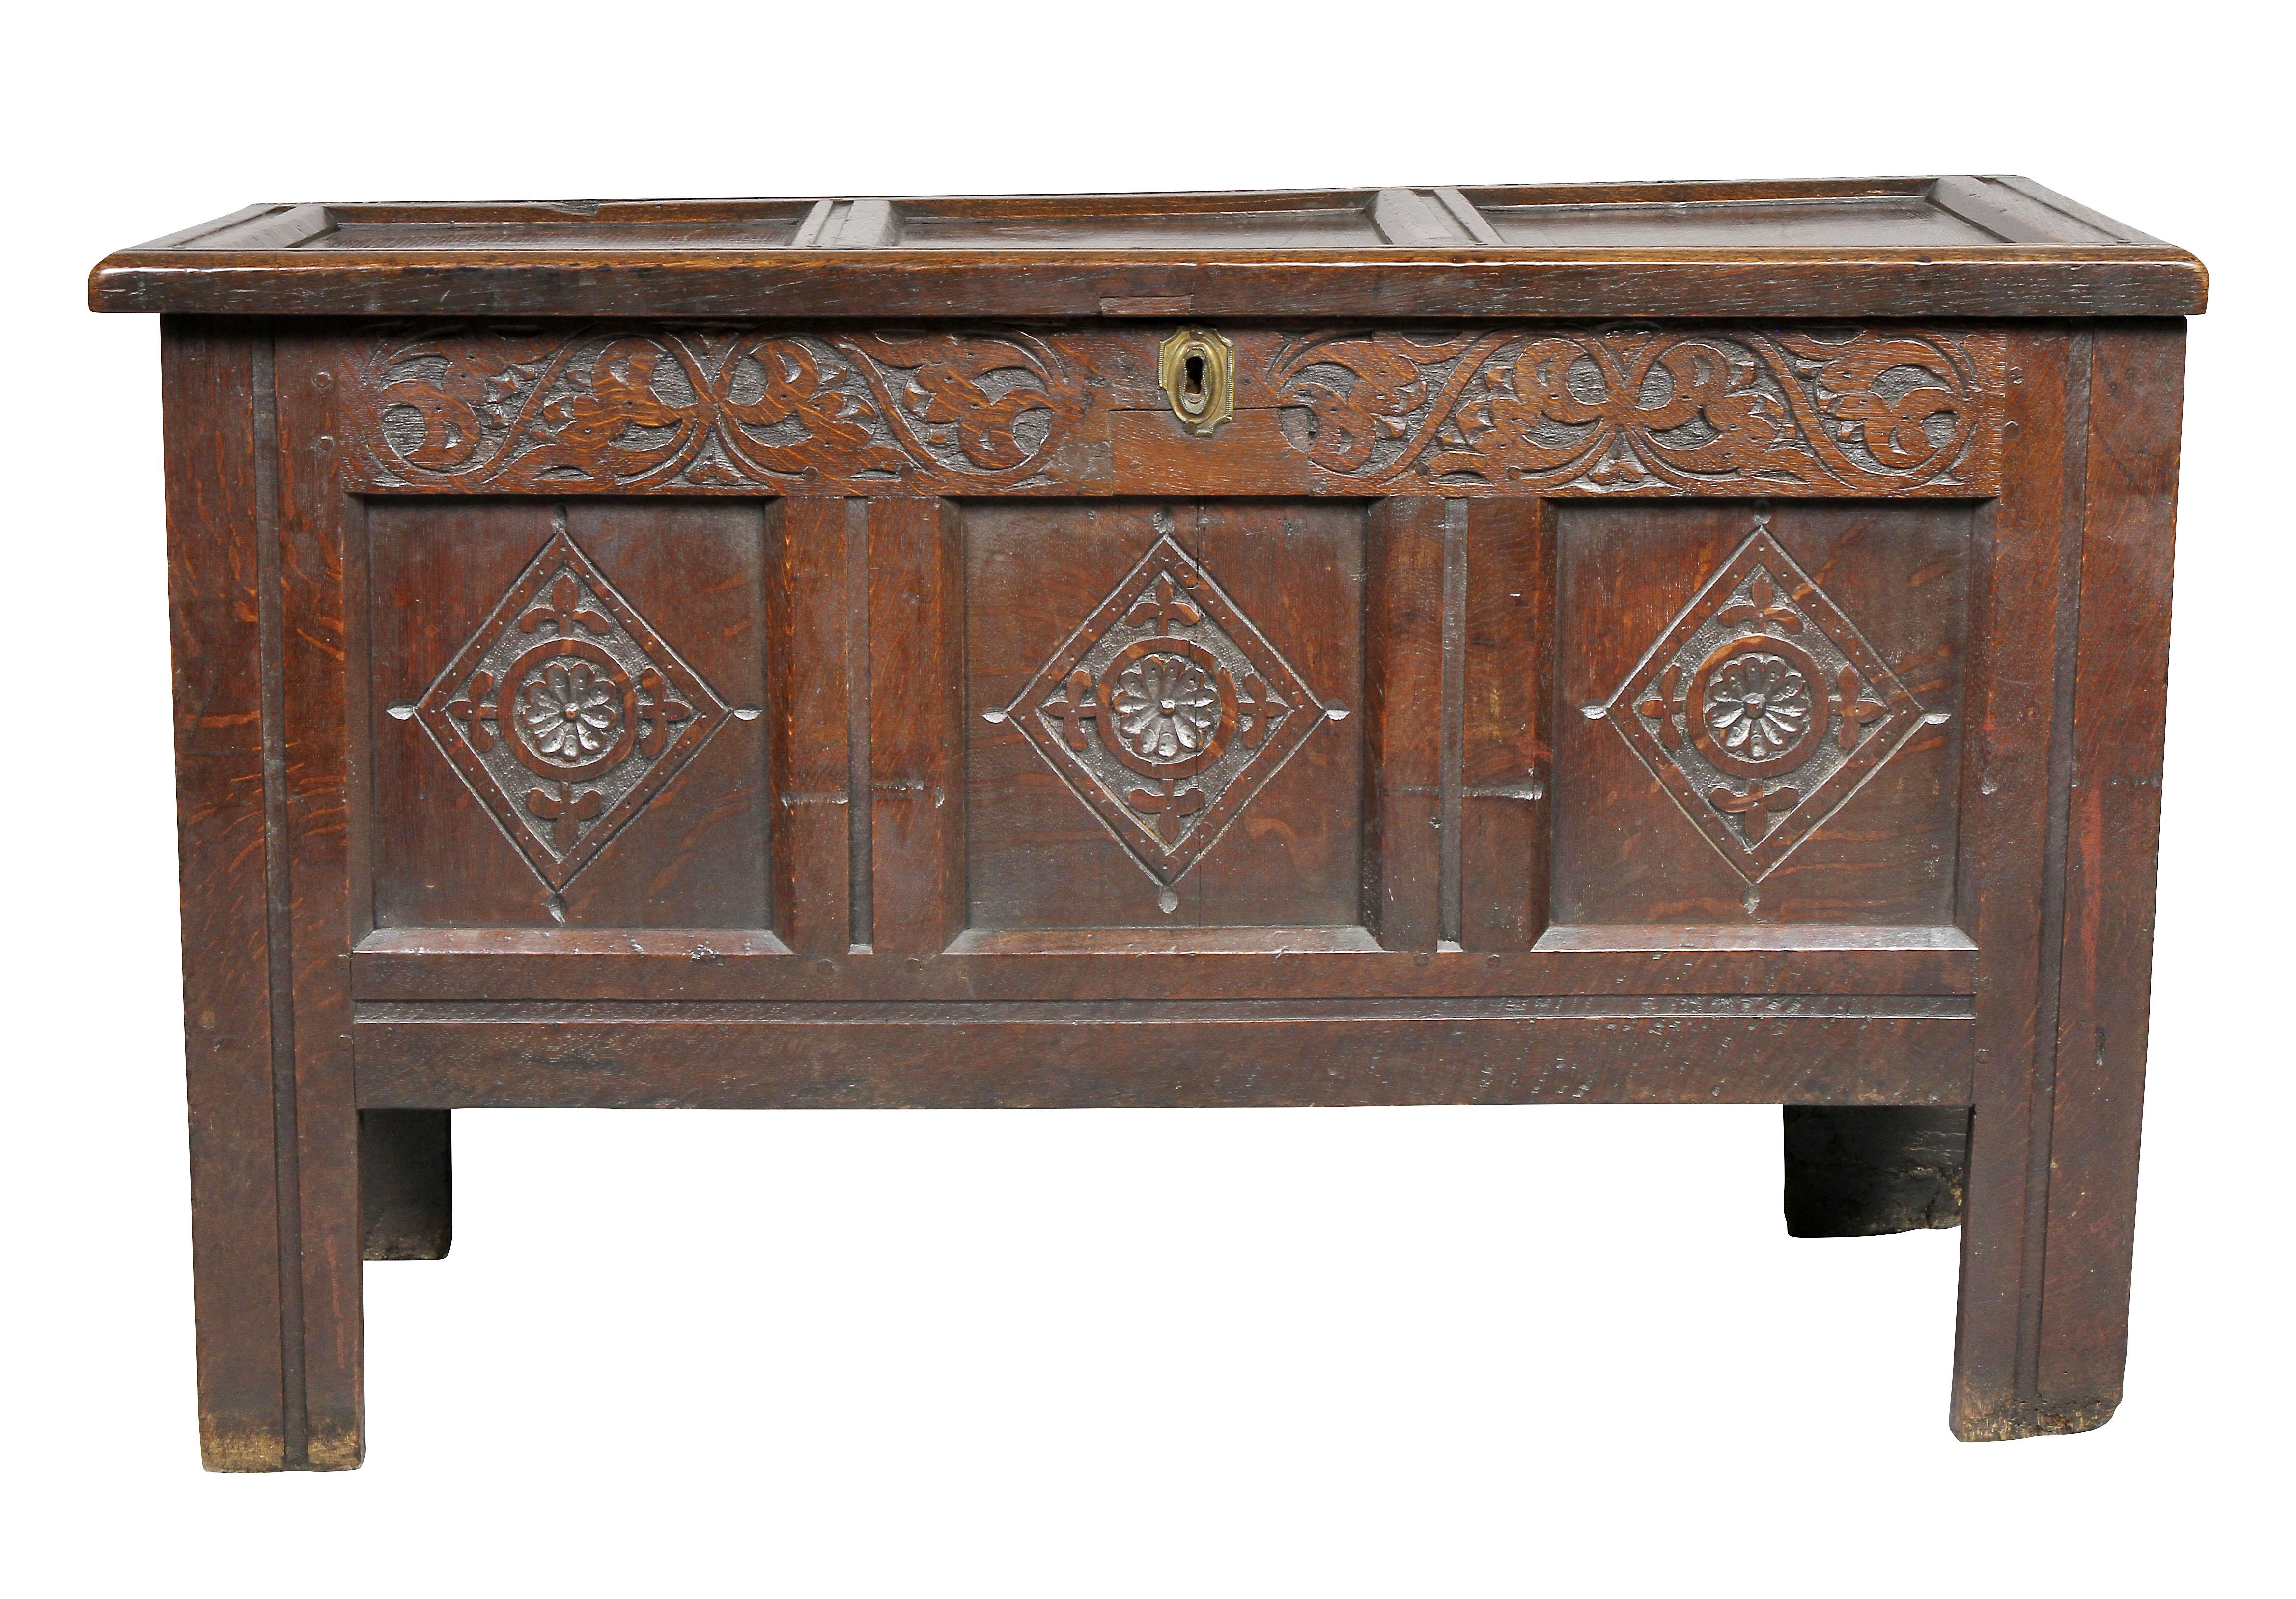 Nice small proportions with paneled hinged lid over a conforming case with three panels with carved detail, square section legs.